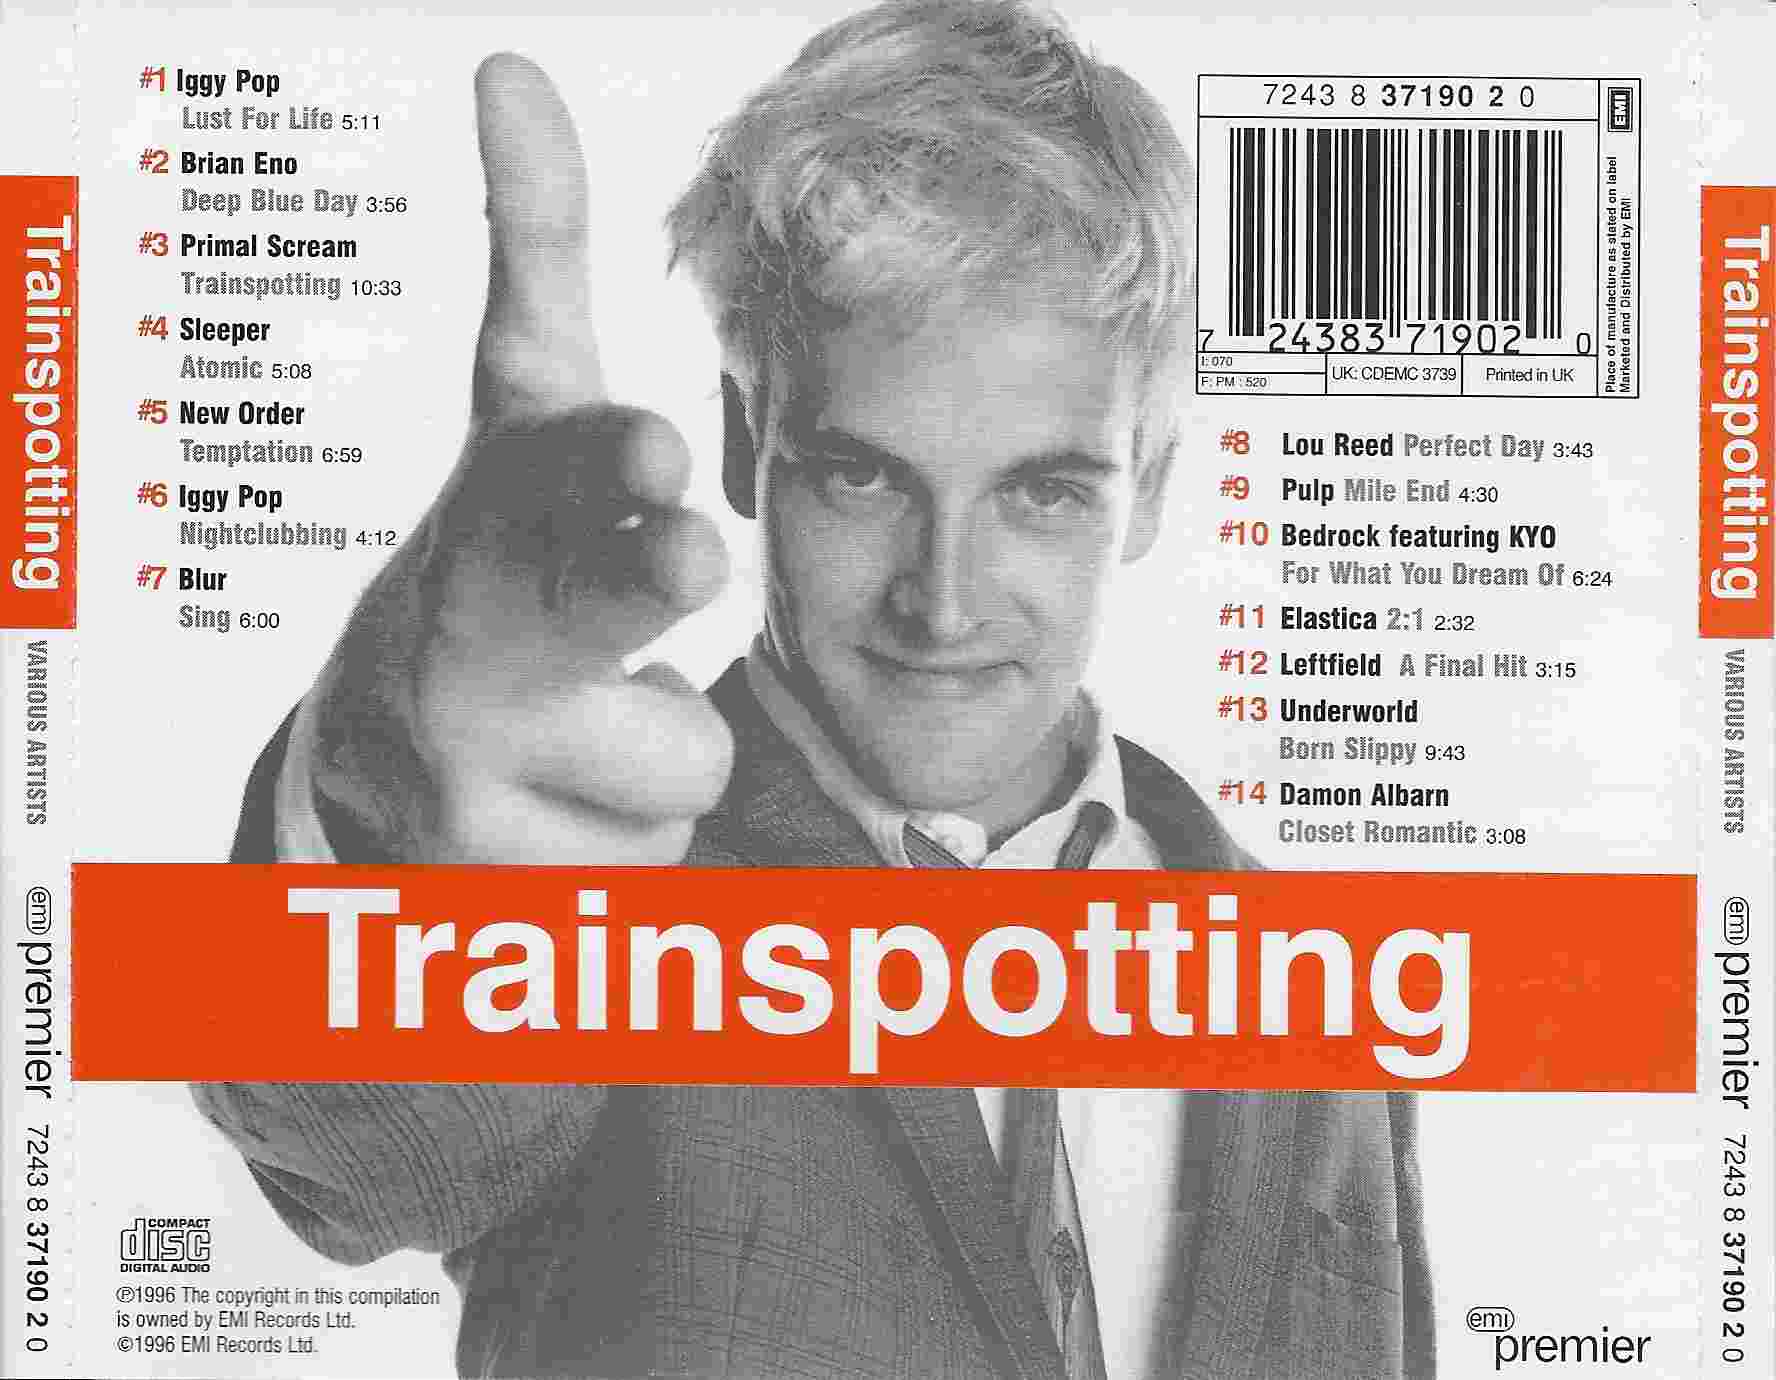 Picture of CDEM 3739 Trainspotting by artist Various from ITV, Channel 4 and Channel 5 library